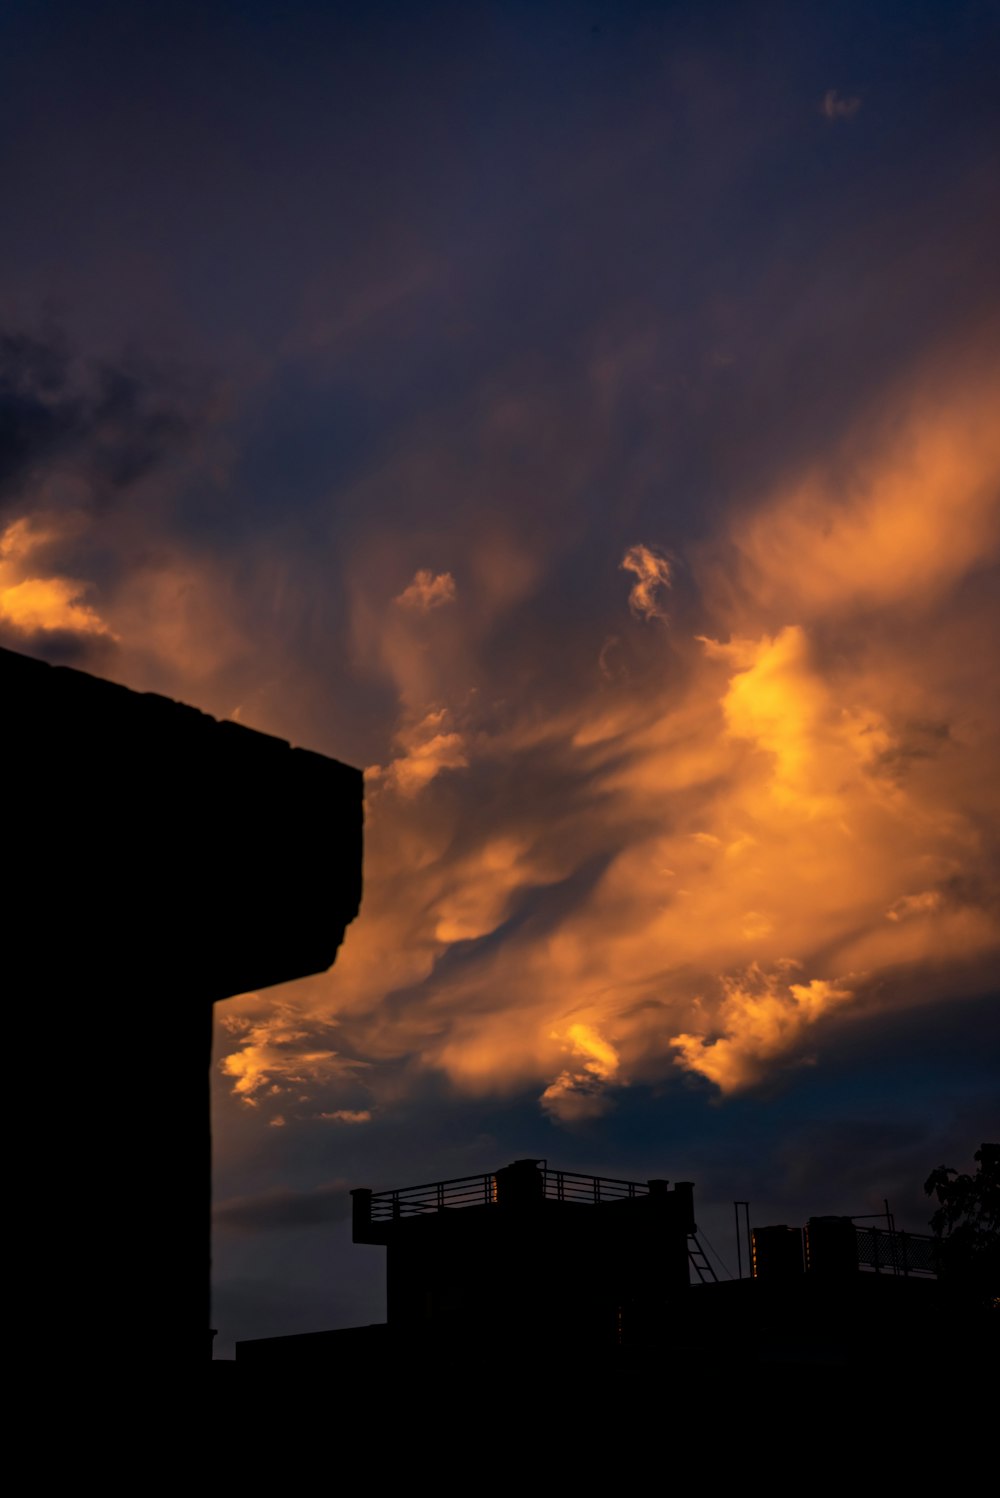 silhouette of building under cloudy sky during sunset